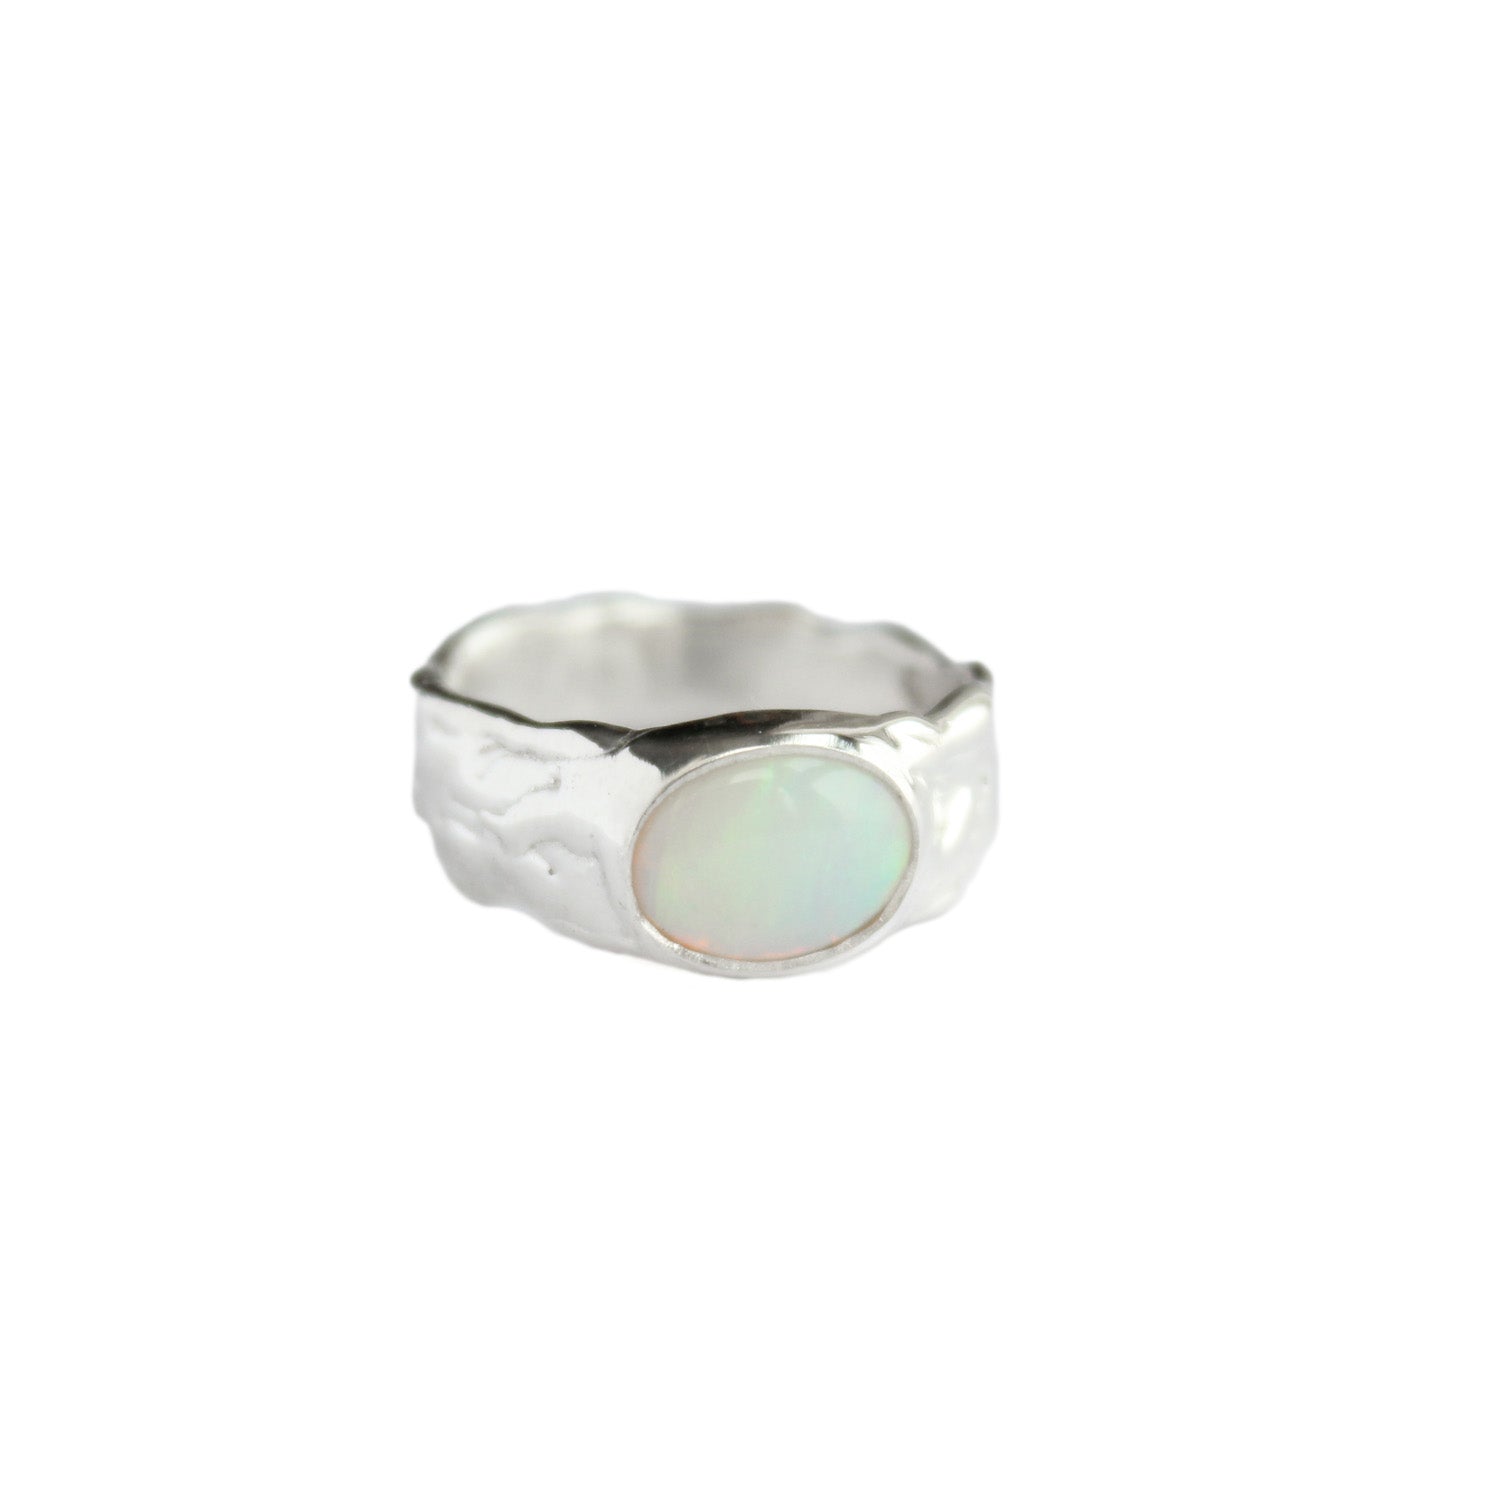 Cloud Ring - Size 5.75